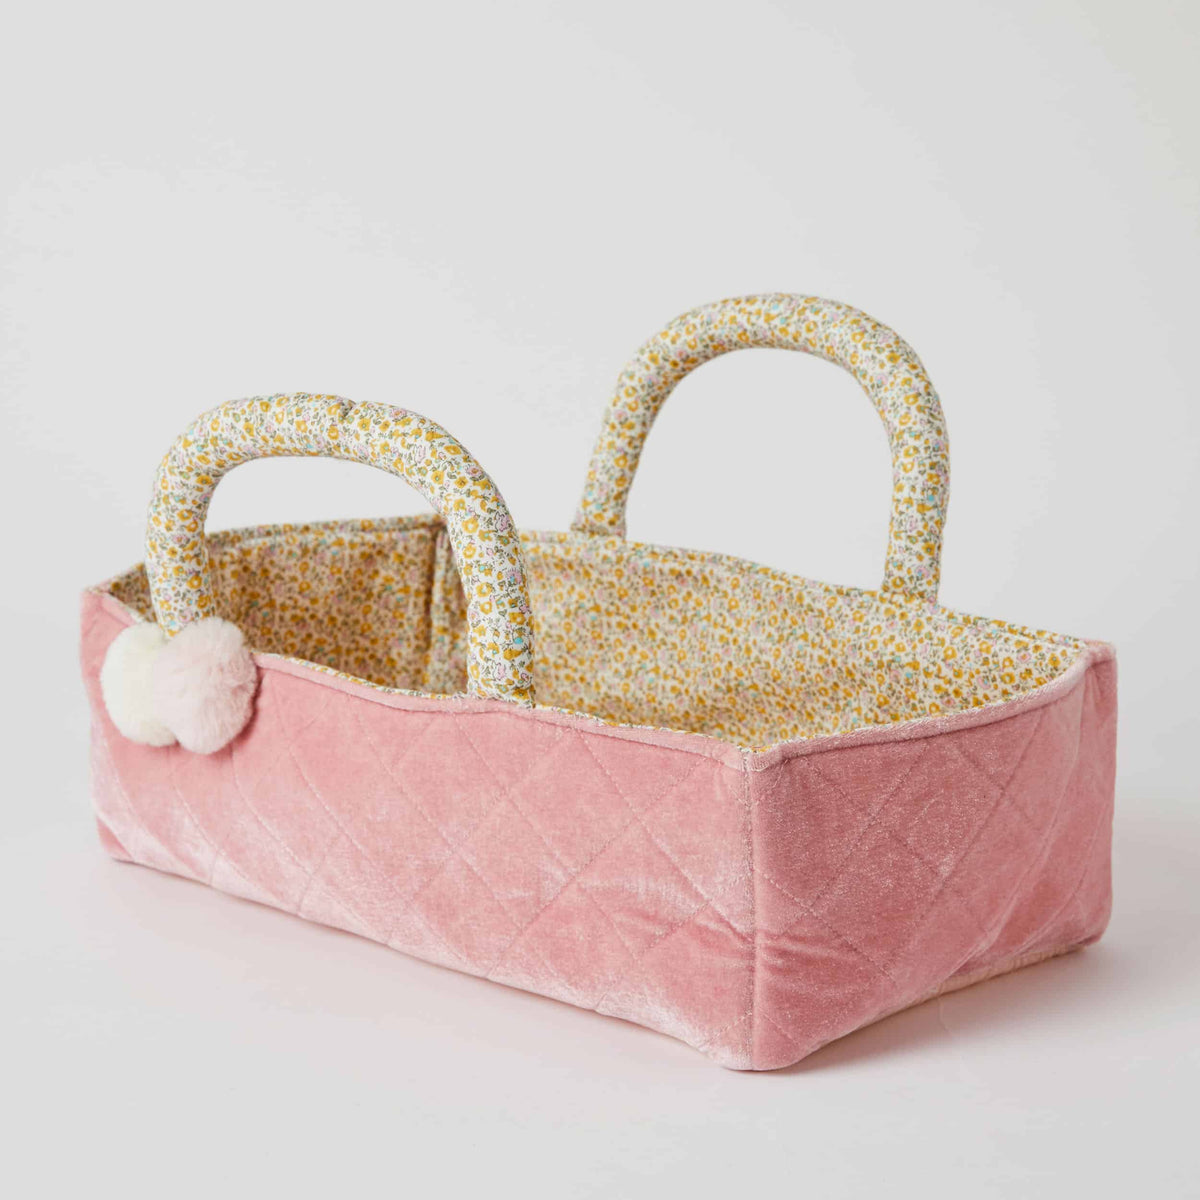 Plush Toy Carry Cot